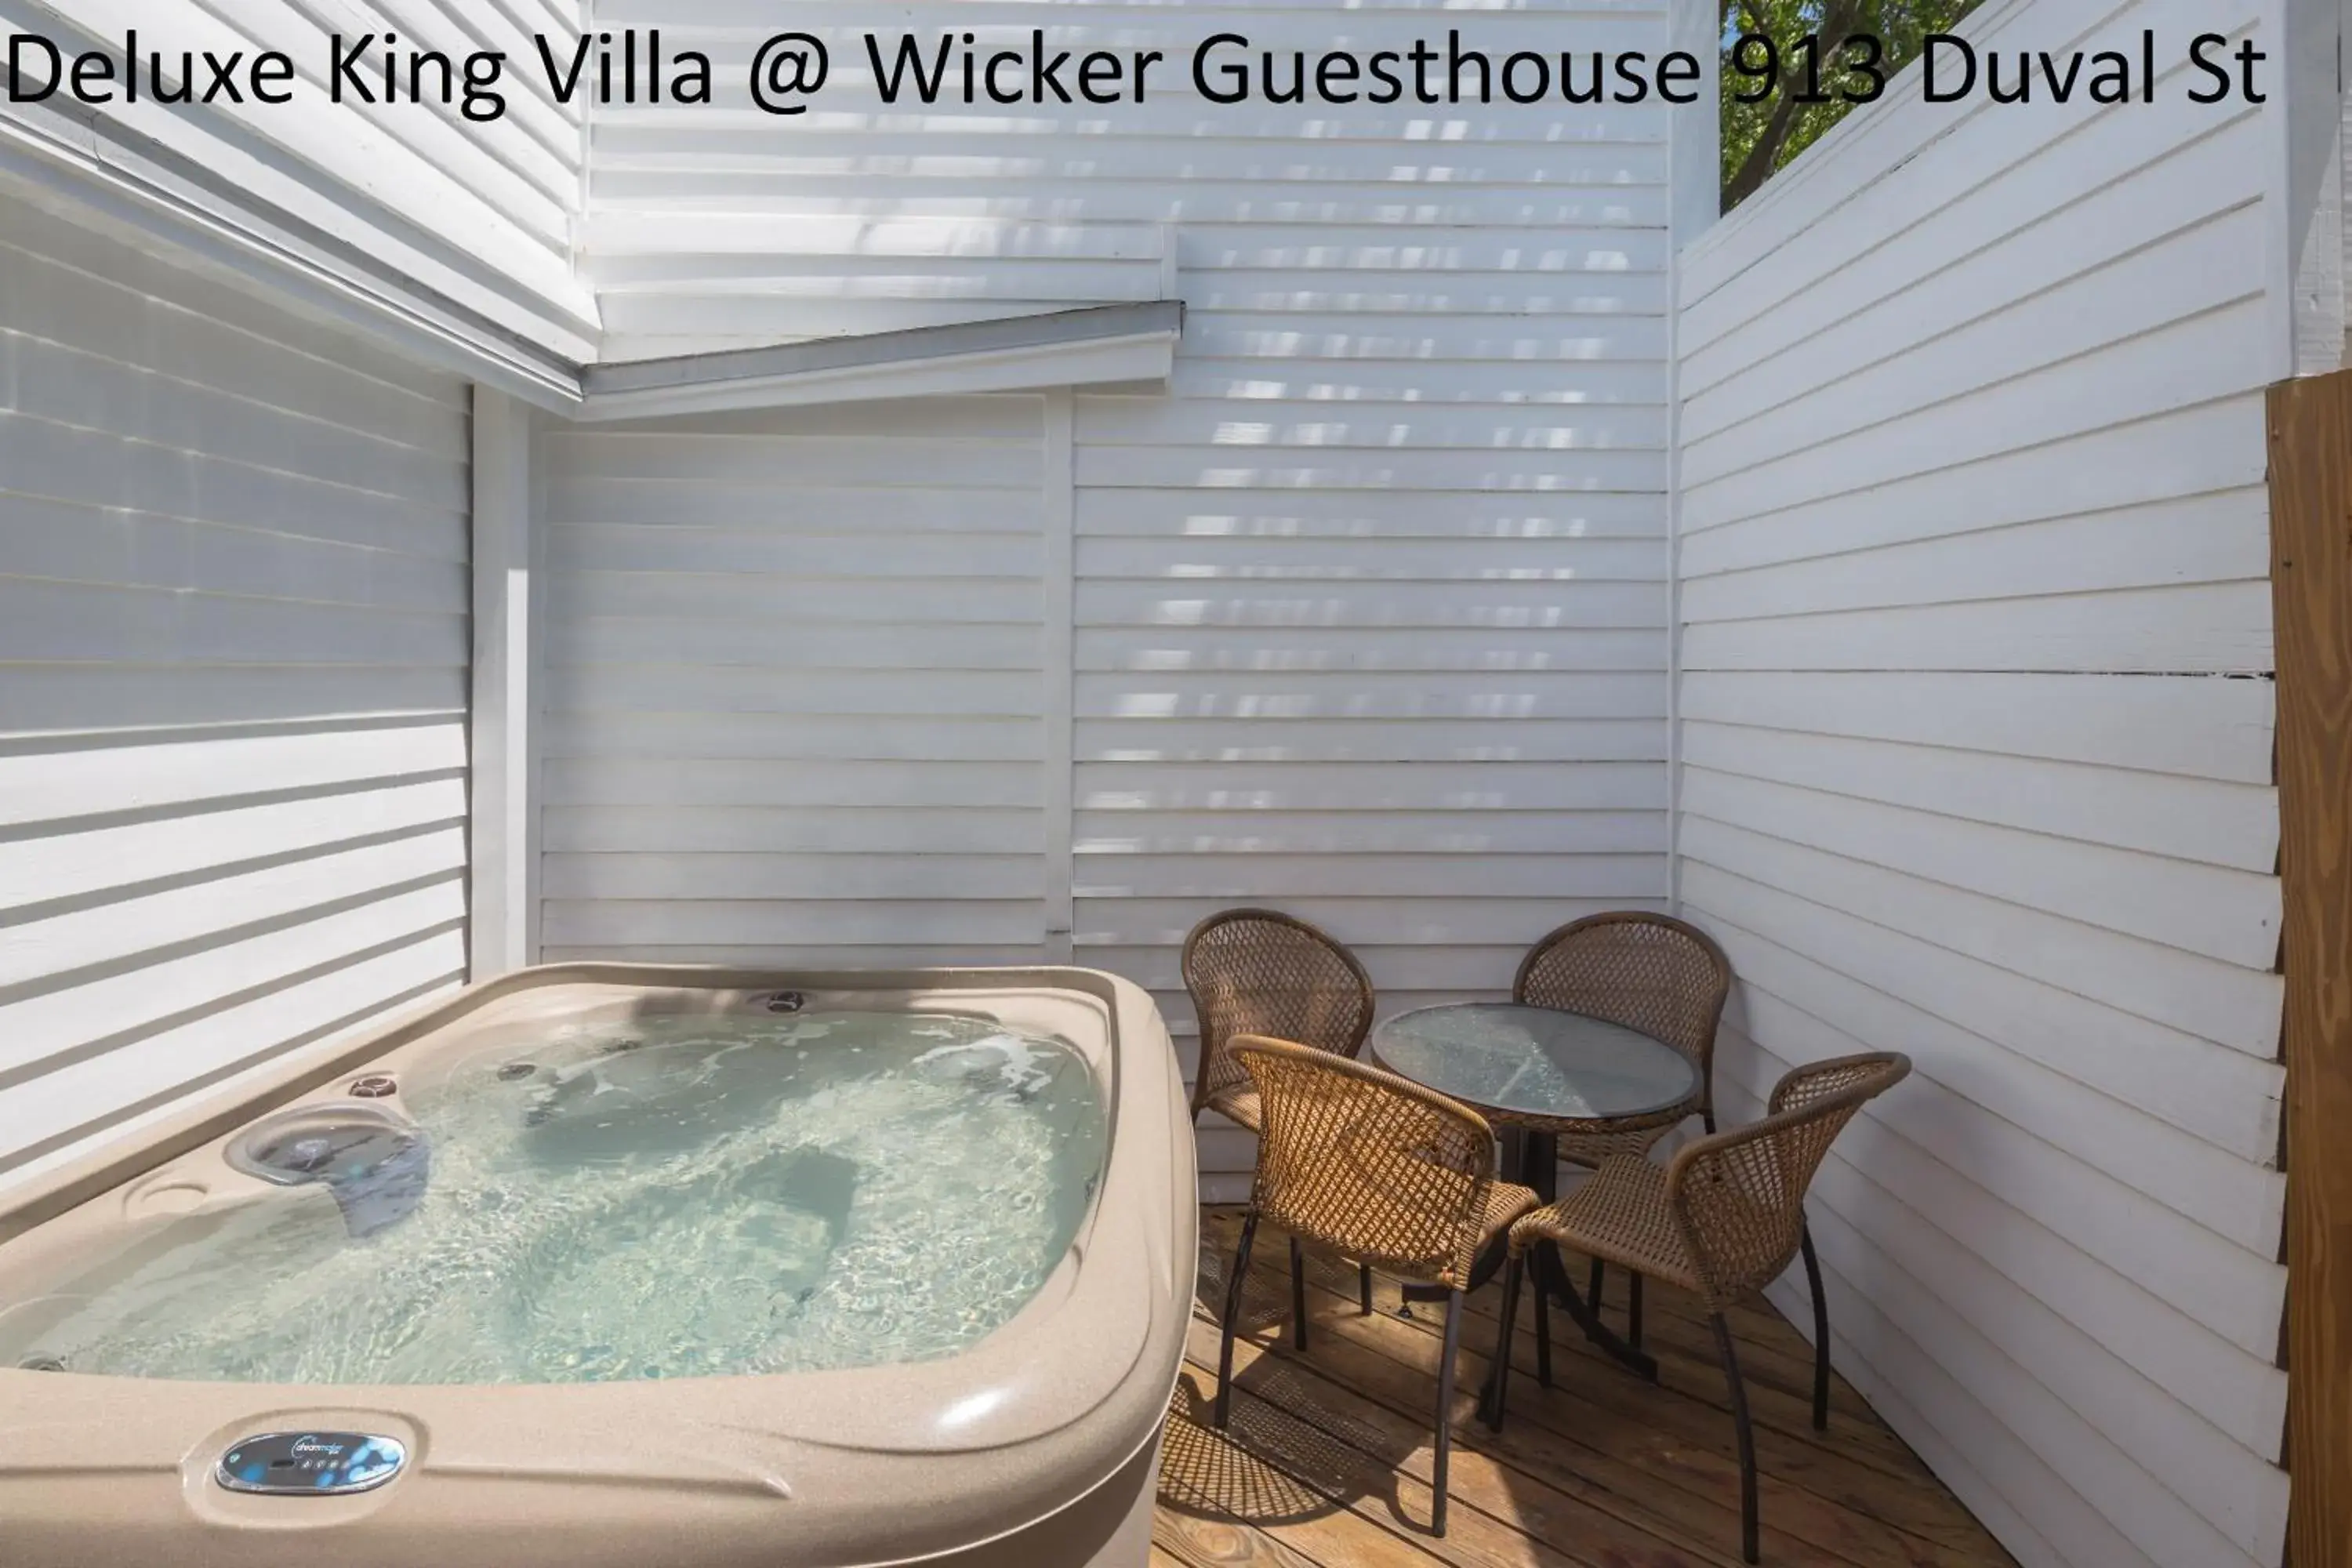 Hot Tub in Wicker Guesthouse